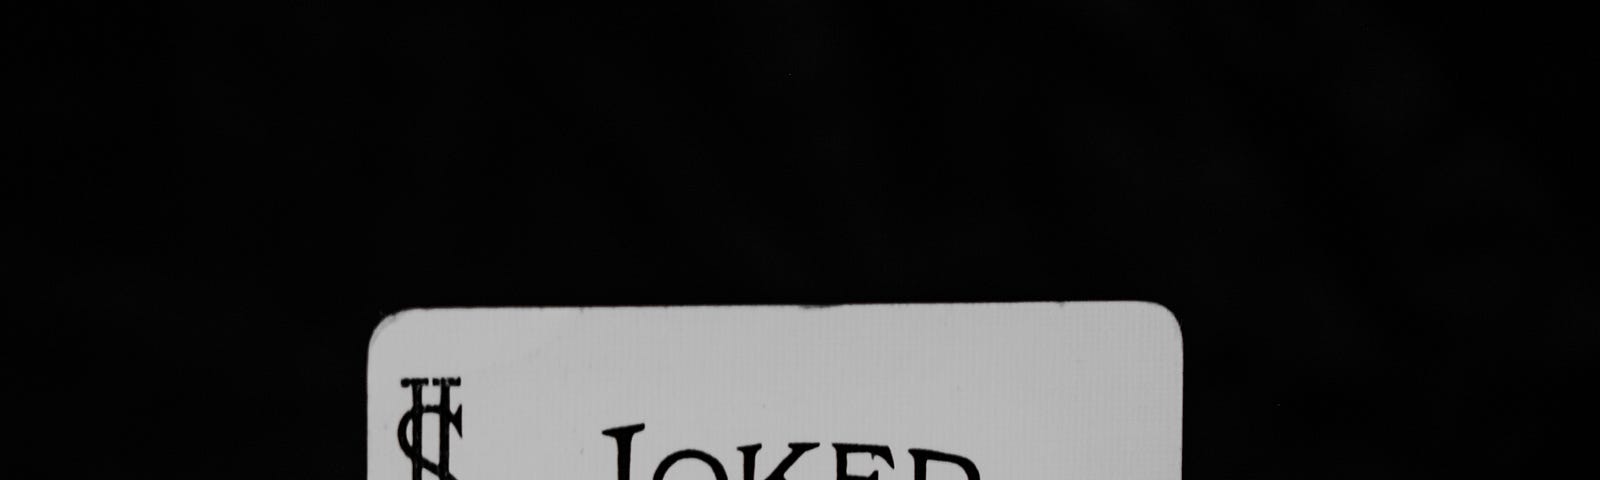 Black-and-white image on black background. Hand grasps partial deck of cards shown from the back, with joker card peeking out face-forward so that you can barely see his eyes — above his cap is the word “Joker.”